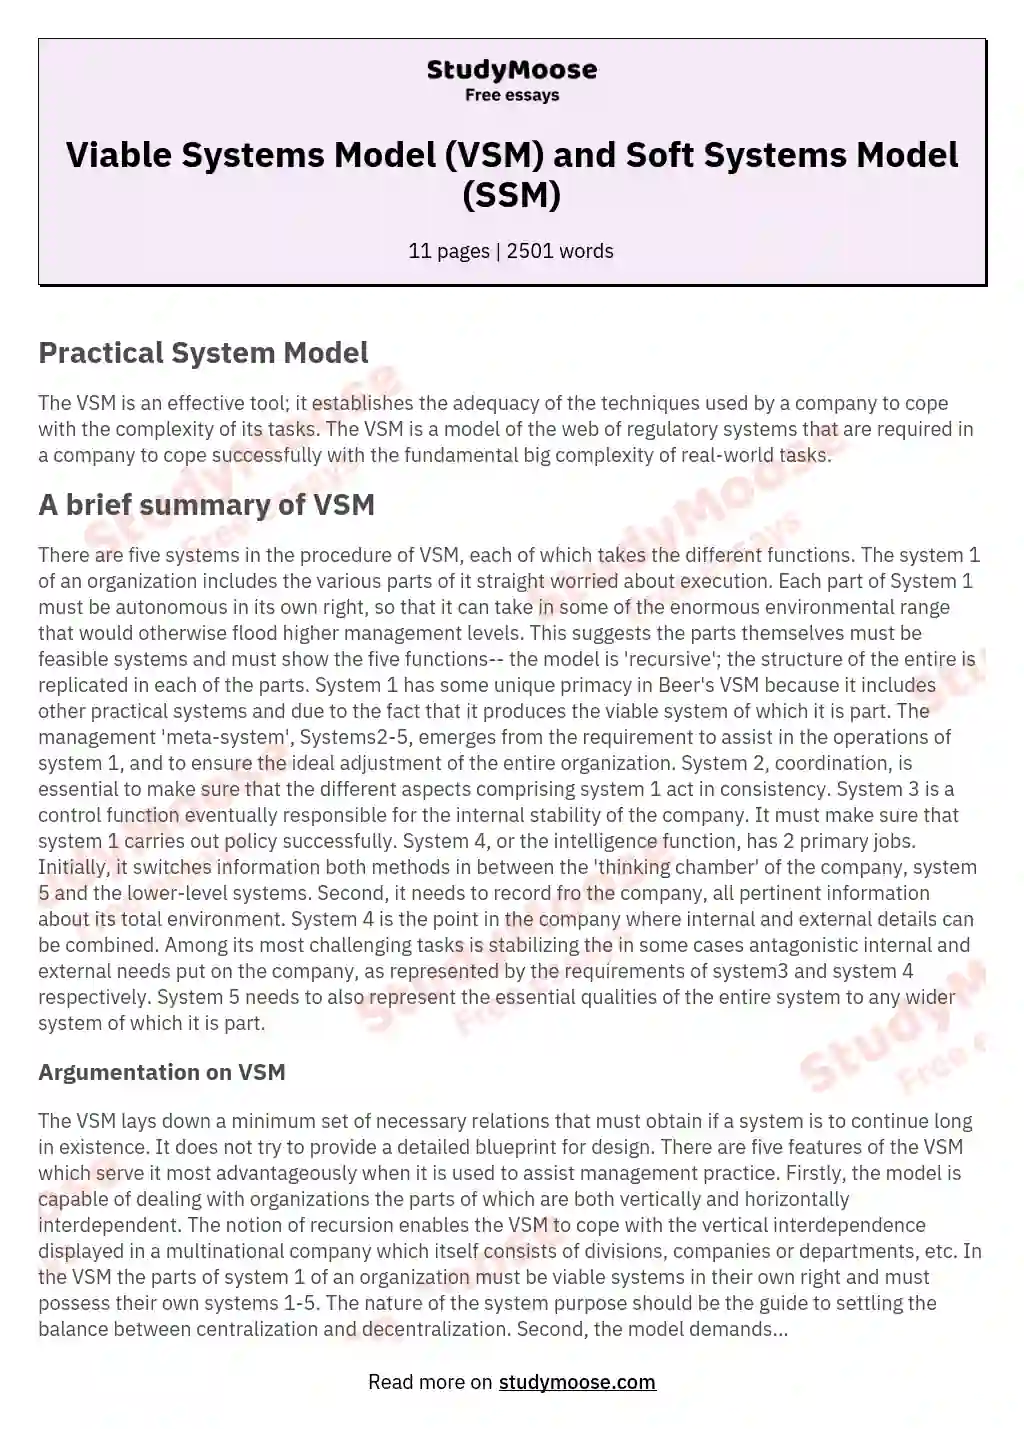 Viable Systems Model (VSM) and Soft Systems Model (SSM)